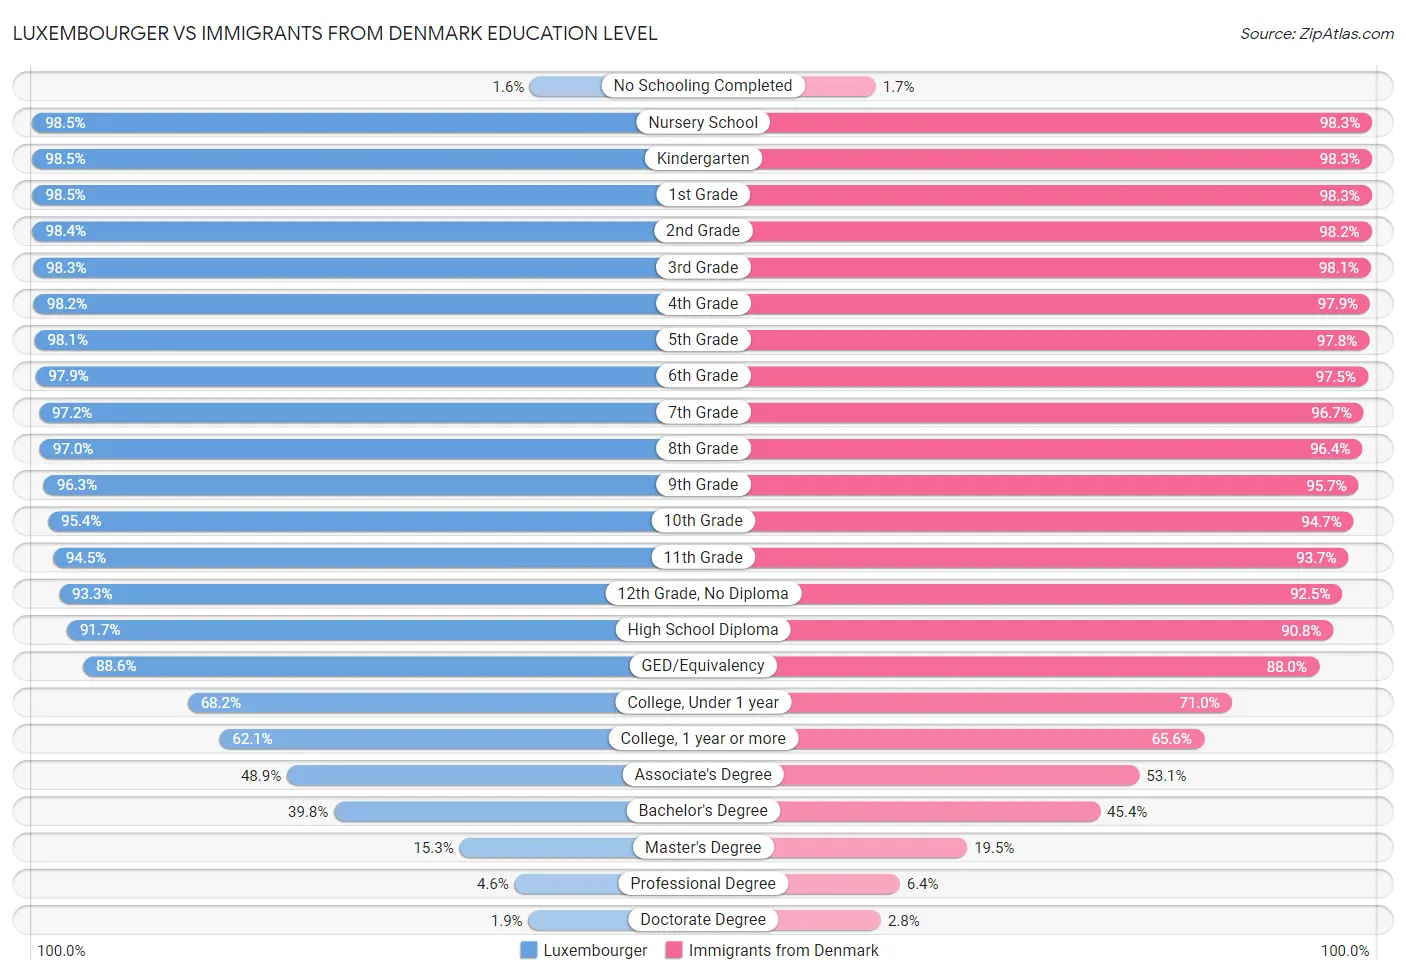 Luxembourger vs Immigrants from Denmark Education Level